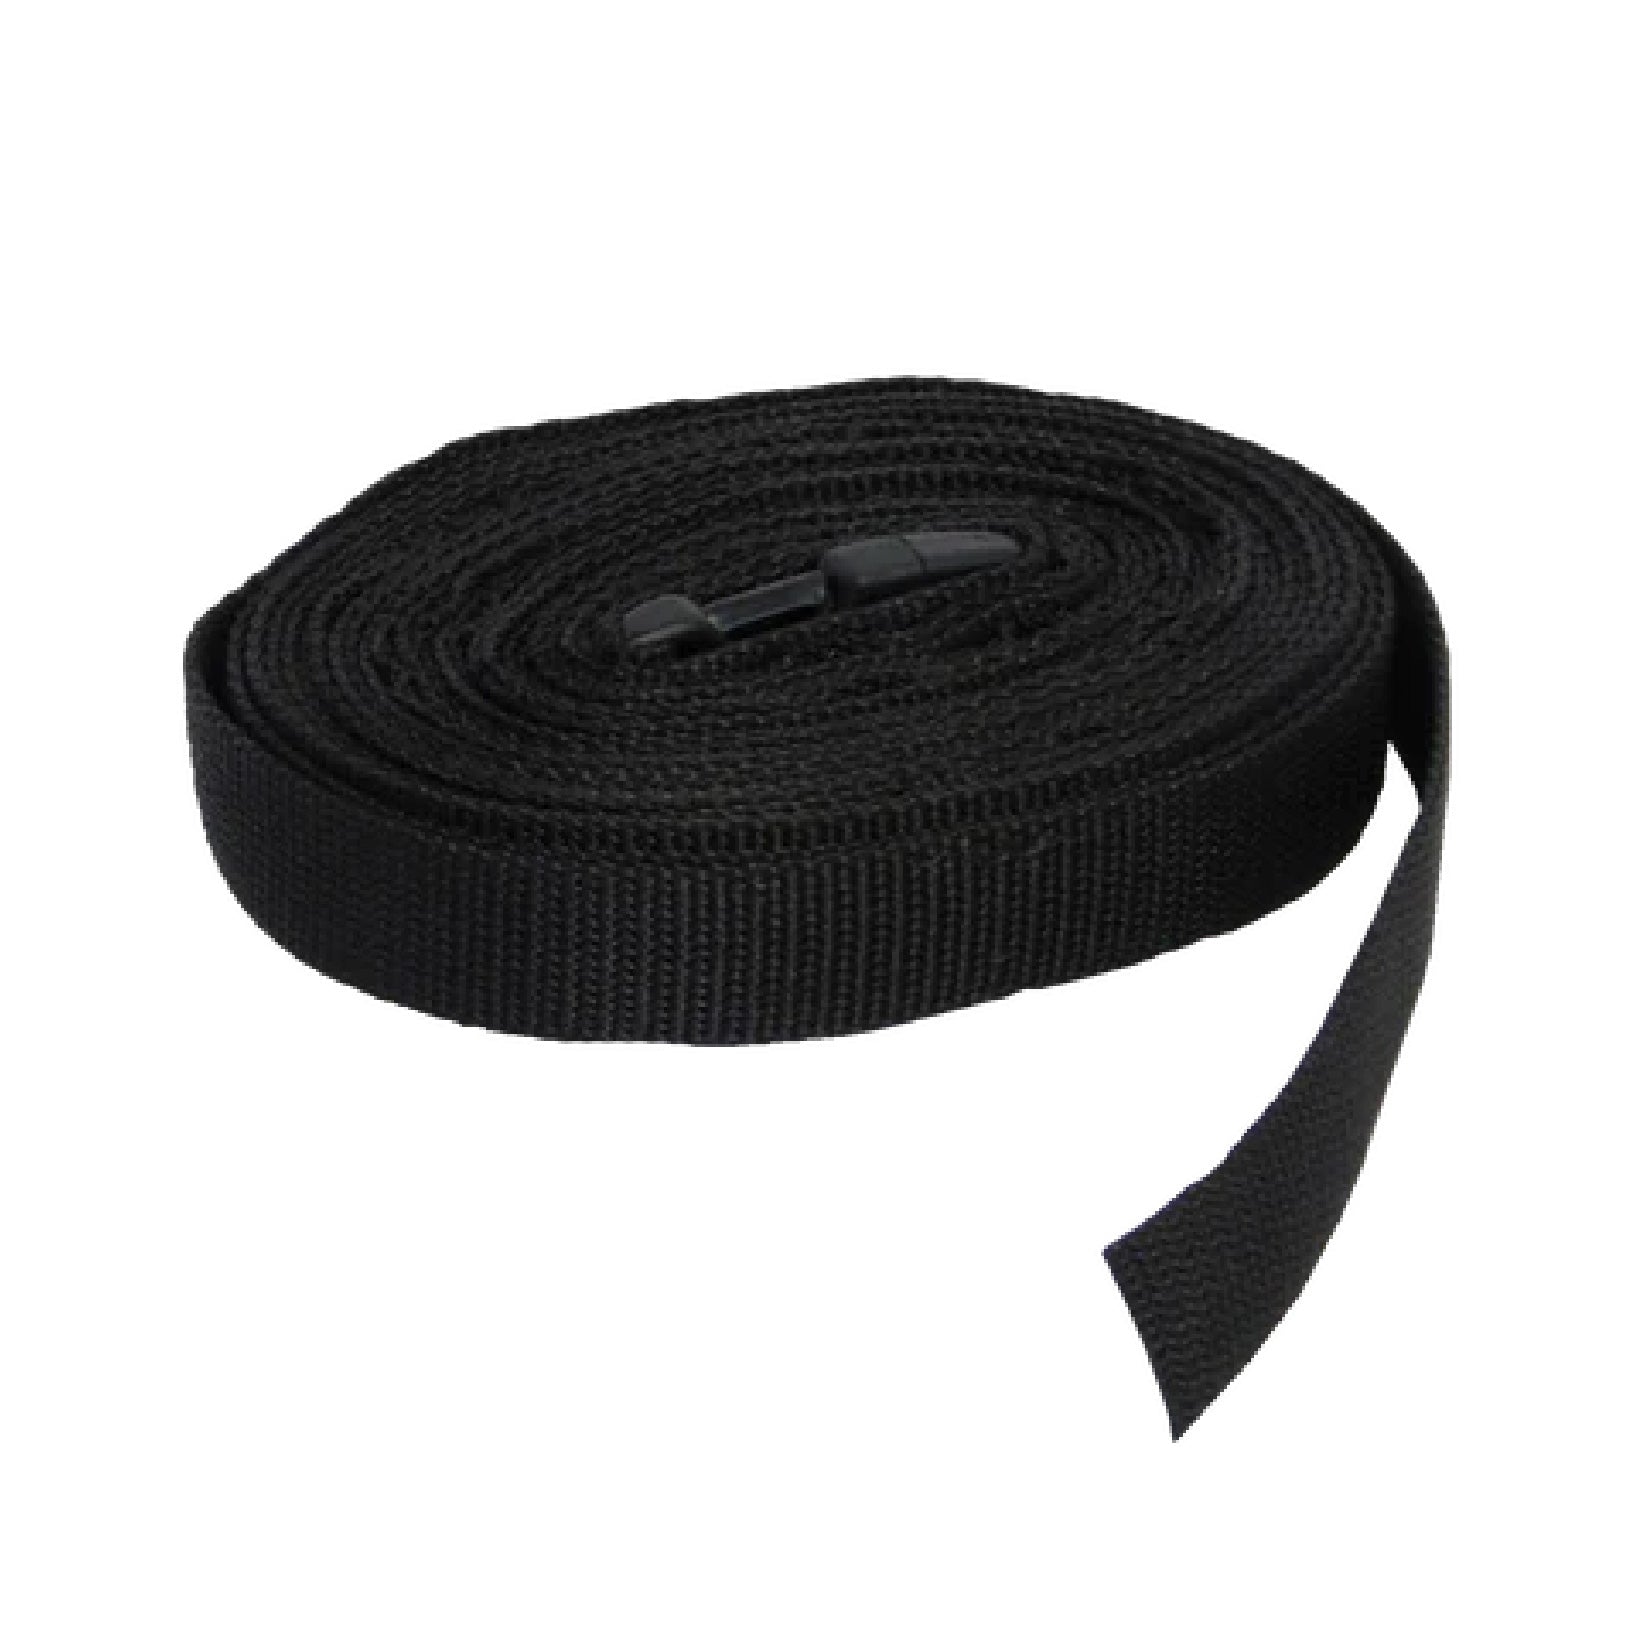 Fit Band or Tube Door Strap-Tube Door Strap-Flaman Fitness-1